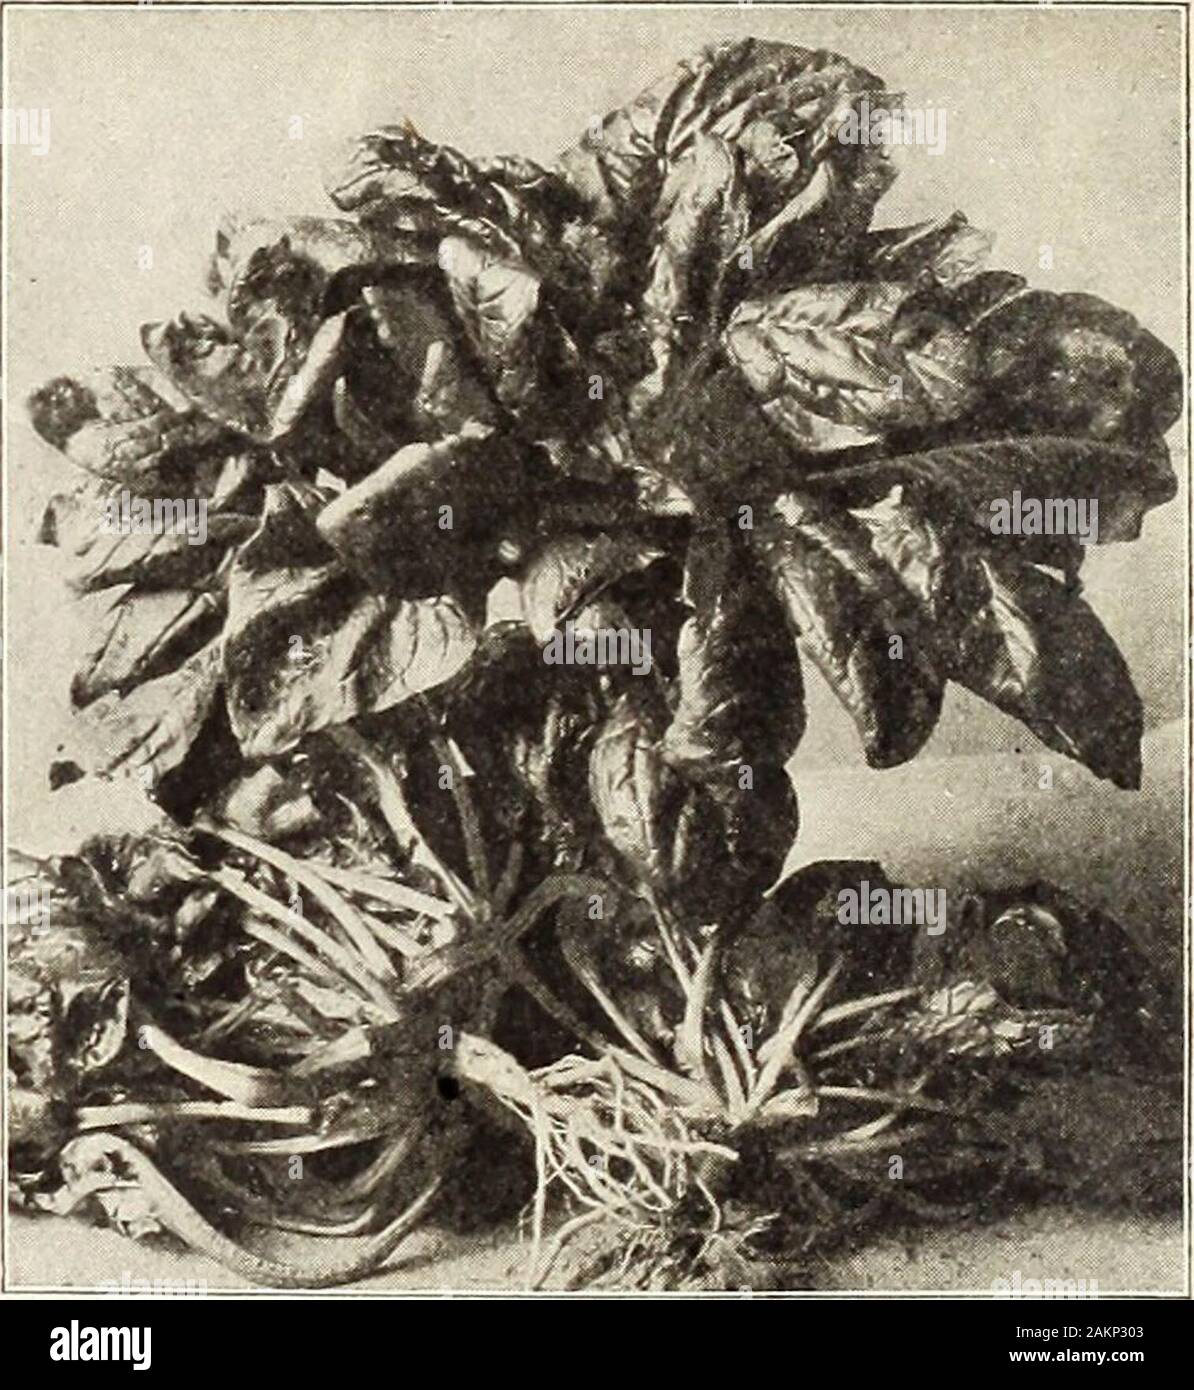 Garden and farm manual : 1905 . SANDWICH ISLAND SALSIFY. Rhubarb (Pie Plant) One ounce will produce about one thousand plants. LARGE VICTORIA. An excellent cooking varietv.Seed, per pkt., 5c; oz., 15c; % lb., 40c; lb., 81.35. RHUBARB ROOTS. EARLY STRAWBERRY andVICTORIA. Each, per large root, 15c; doz., 81.00; 100,$4.50, by express; by mail, postpaid, 25c. each ; $2.00 per doz. Spinach One ounce will sow one hundred feet of drill. Twelvepounds will sow one acre. Improved Early Giant Thick-Leaved This new English Spinach, seed of which we offered forsale two years ago for the first time in Ameri Stock Photo